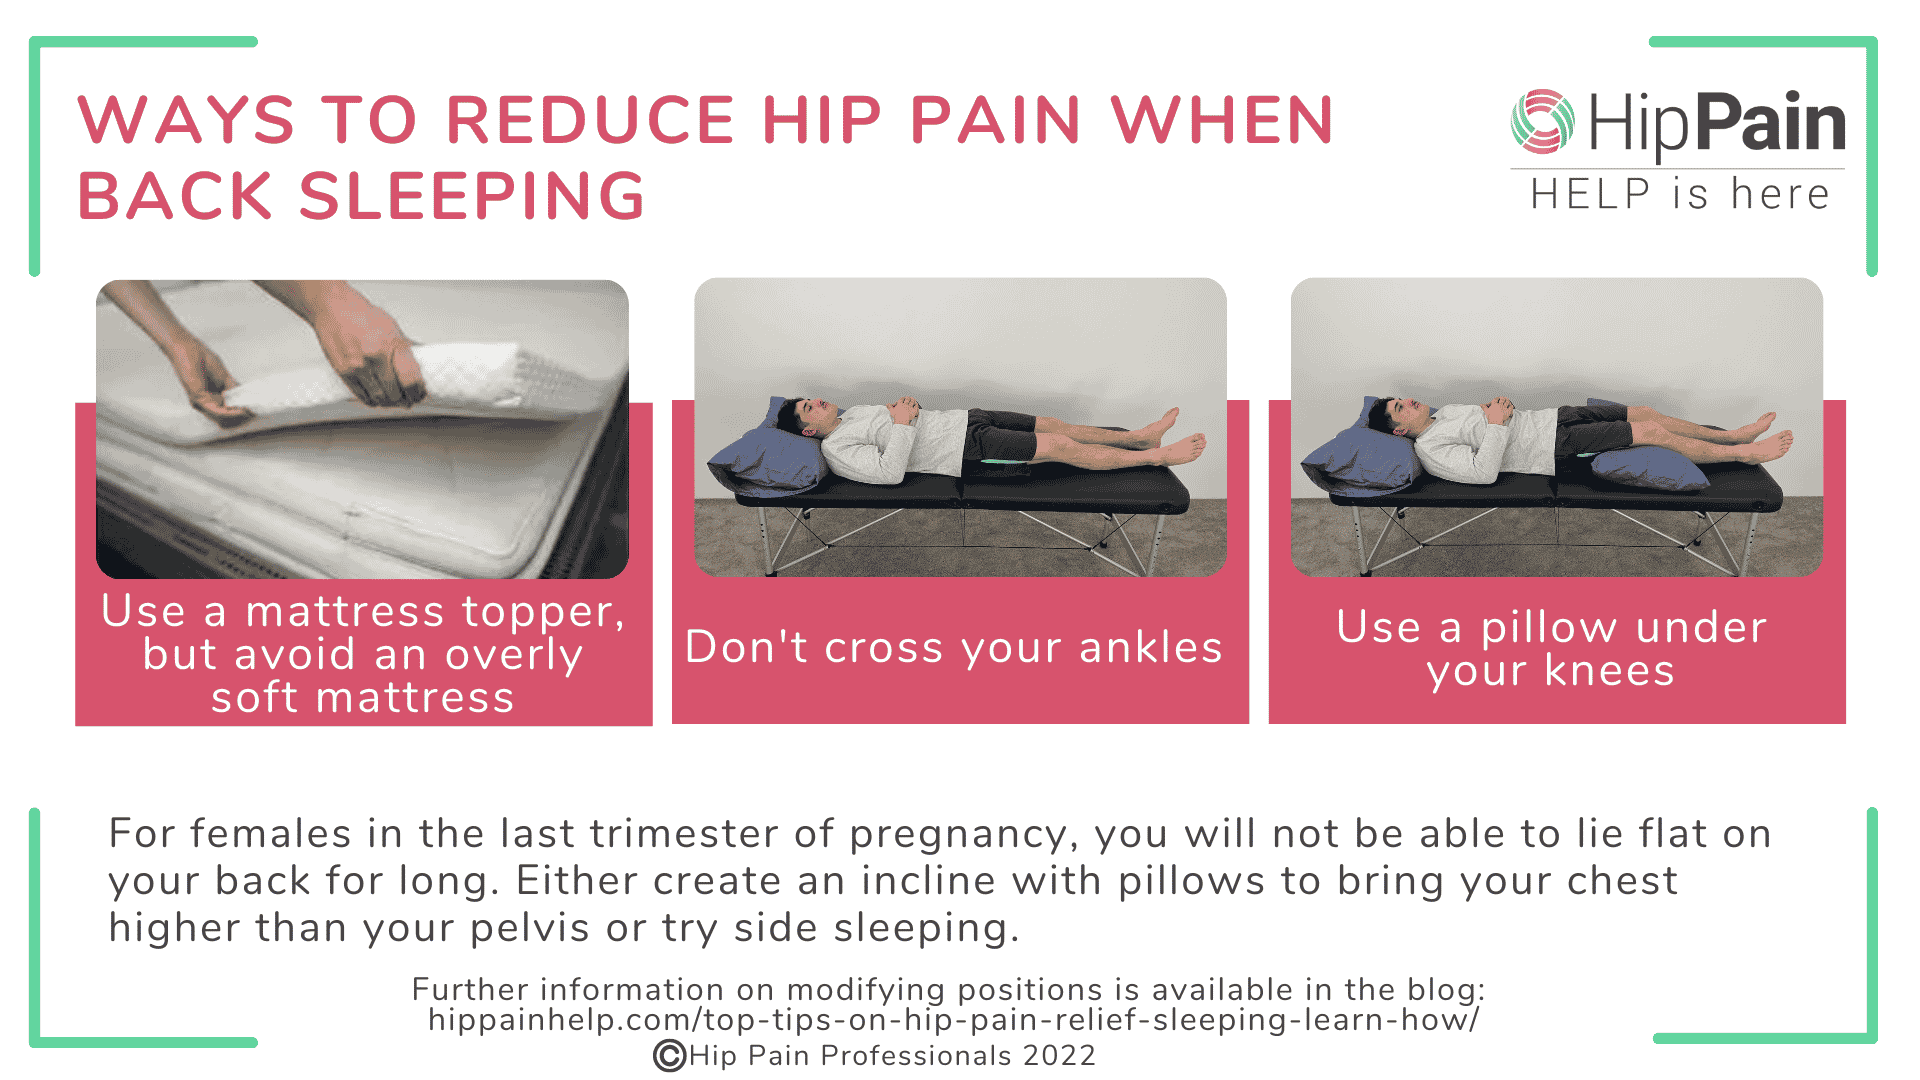 Hip Hanging is Easy - But May Not Be A Good Way to Stand For Hip Pain Relief